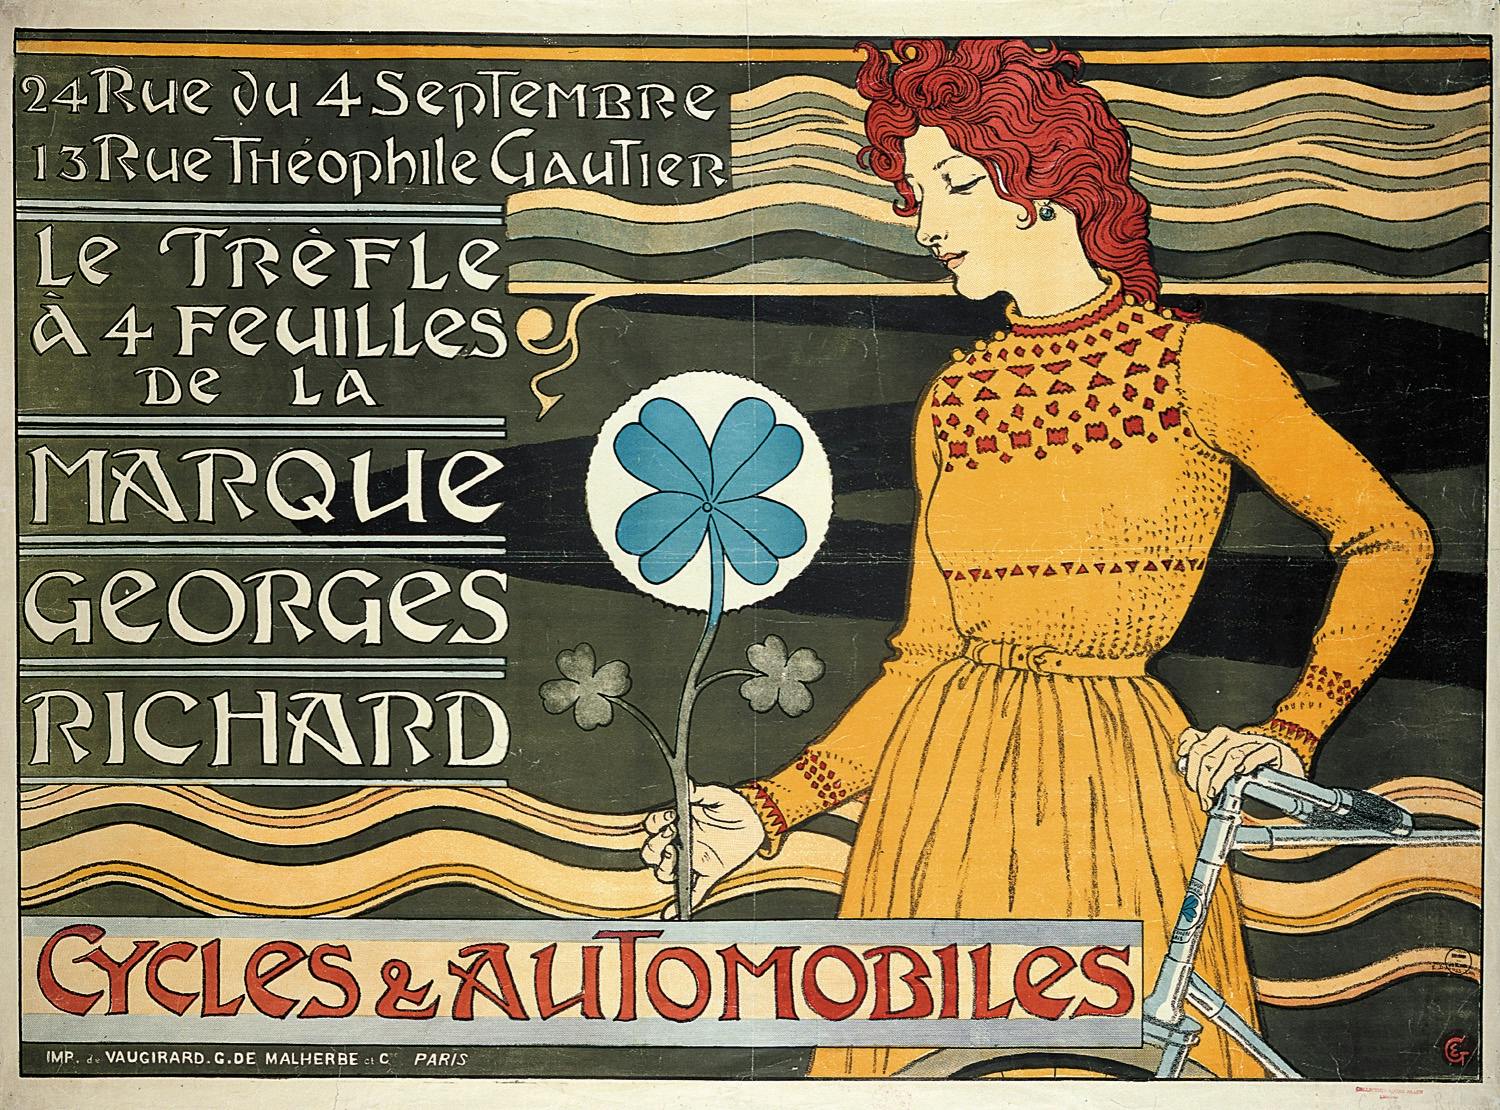 Eugène Grasset’s influence on Art Nouveau: from posters to typographic design, 1885–1900